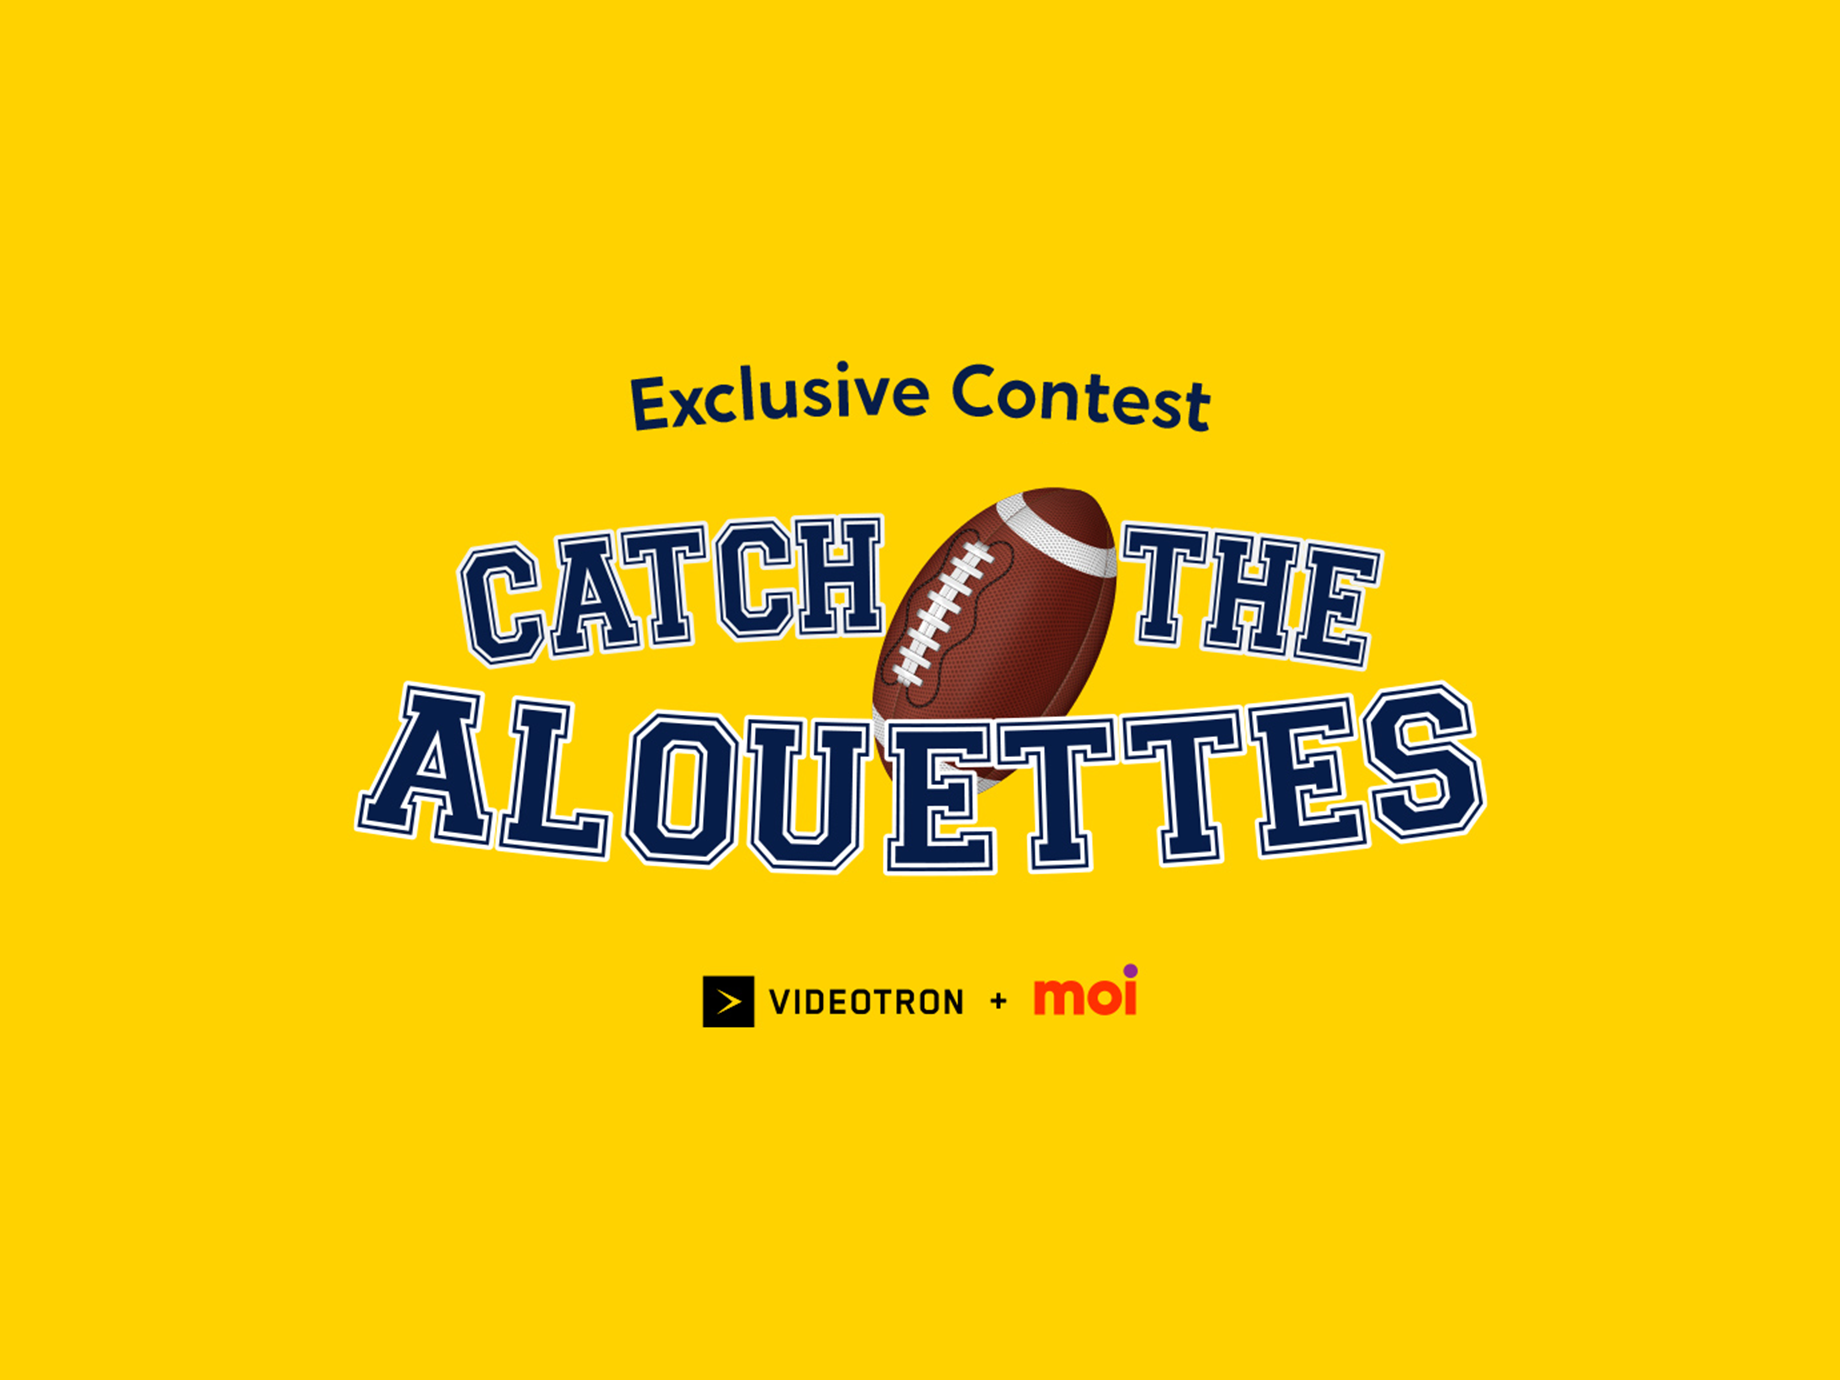 Exclusive Contest Catch the Alouettes!